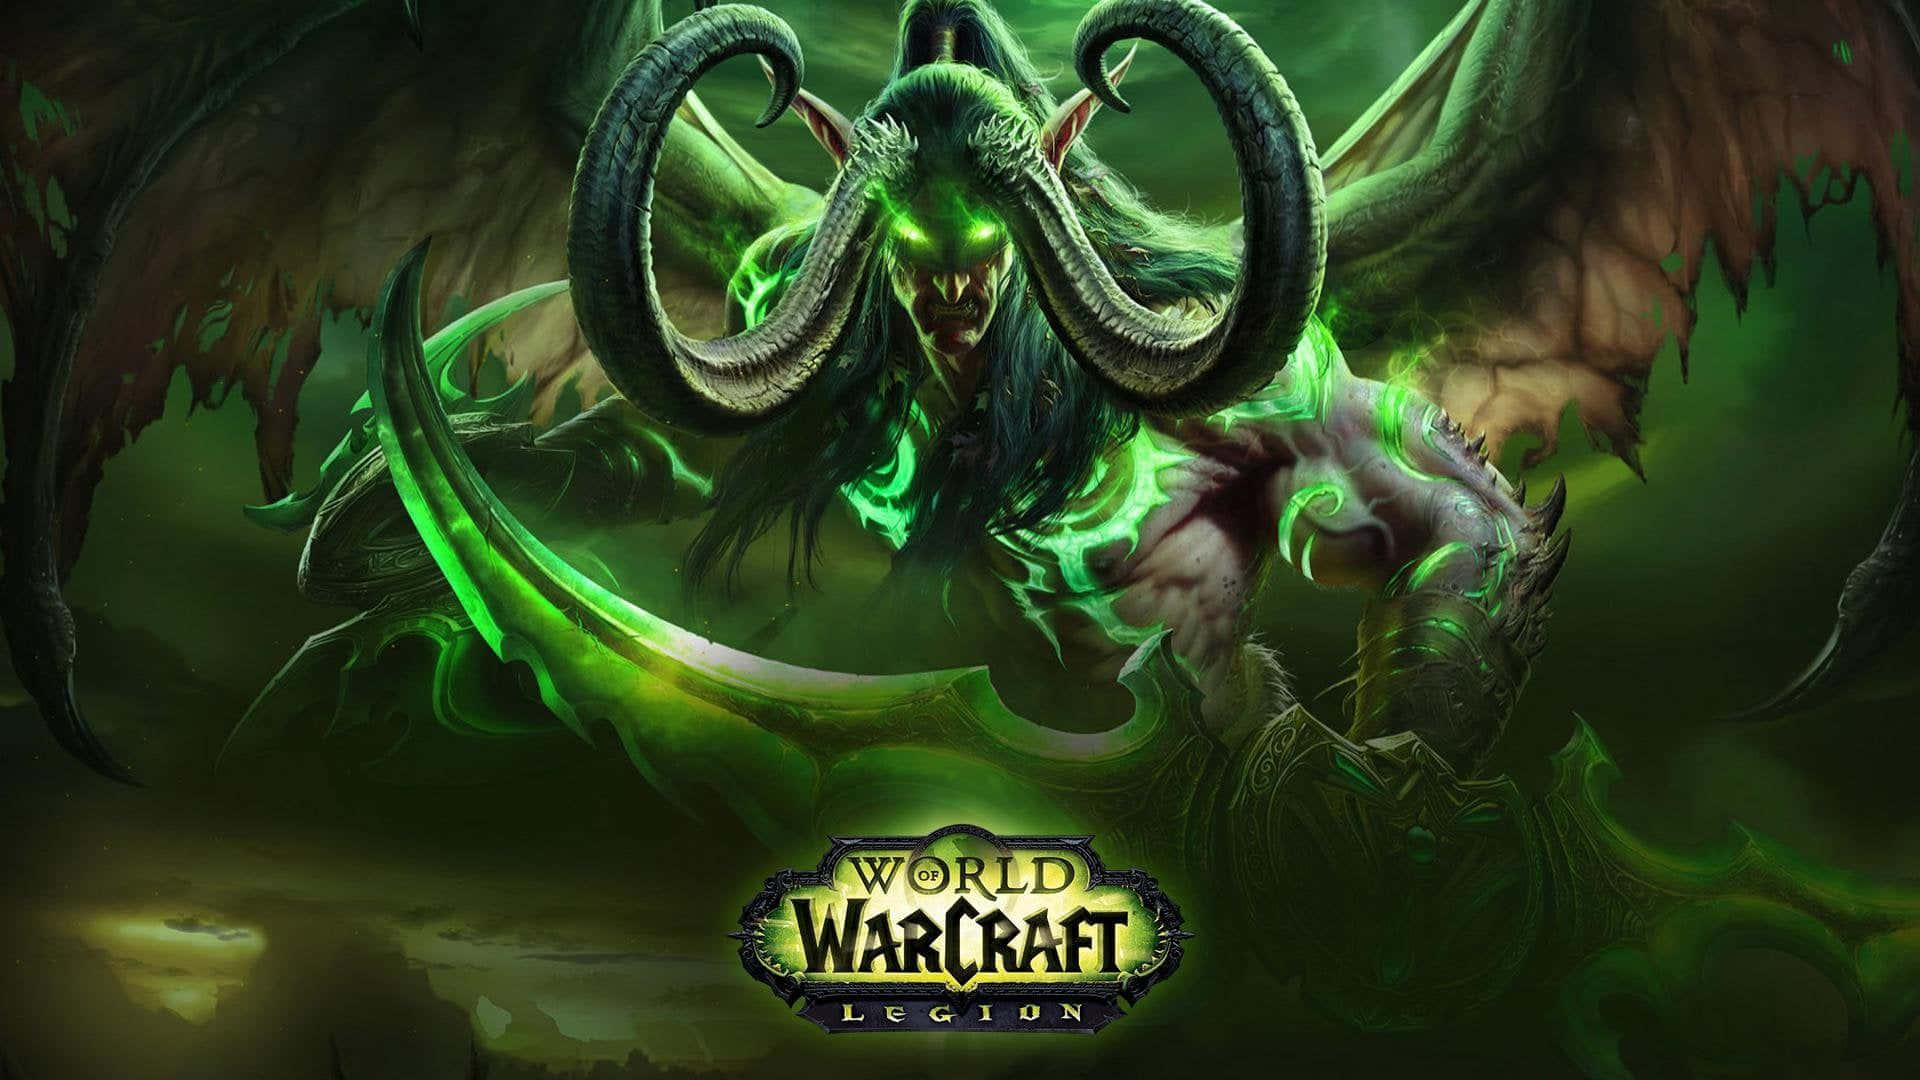 Immerse yourself in the world of World of Warcraft Wallpaper